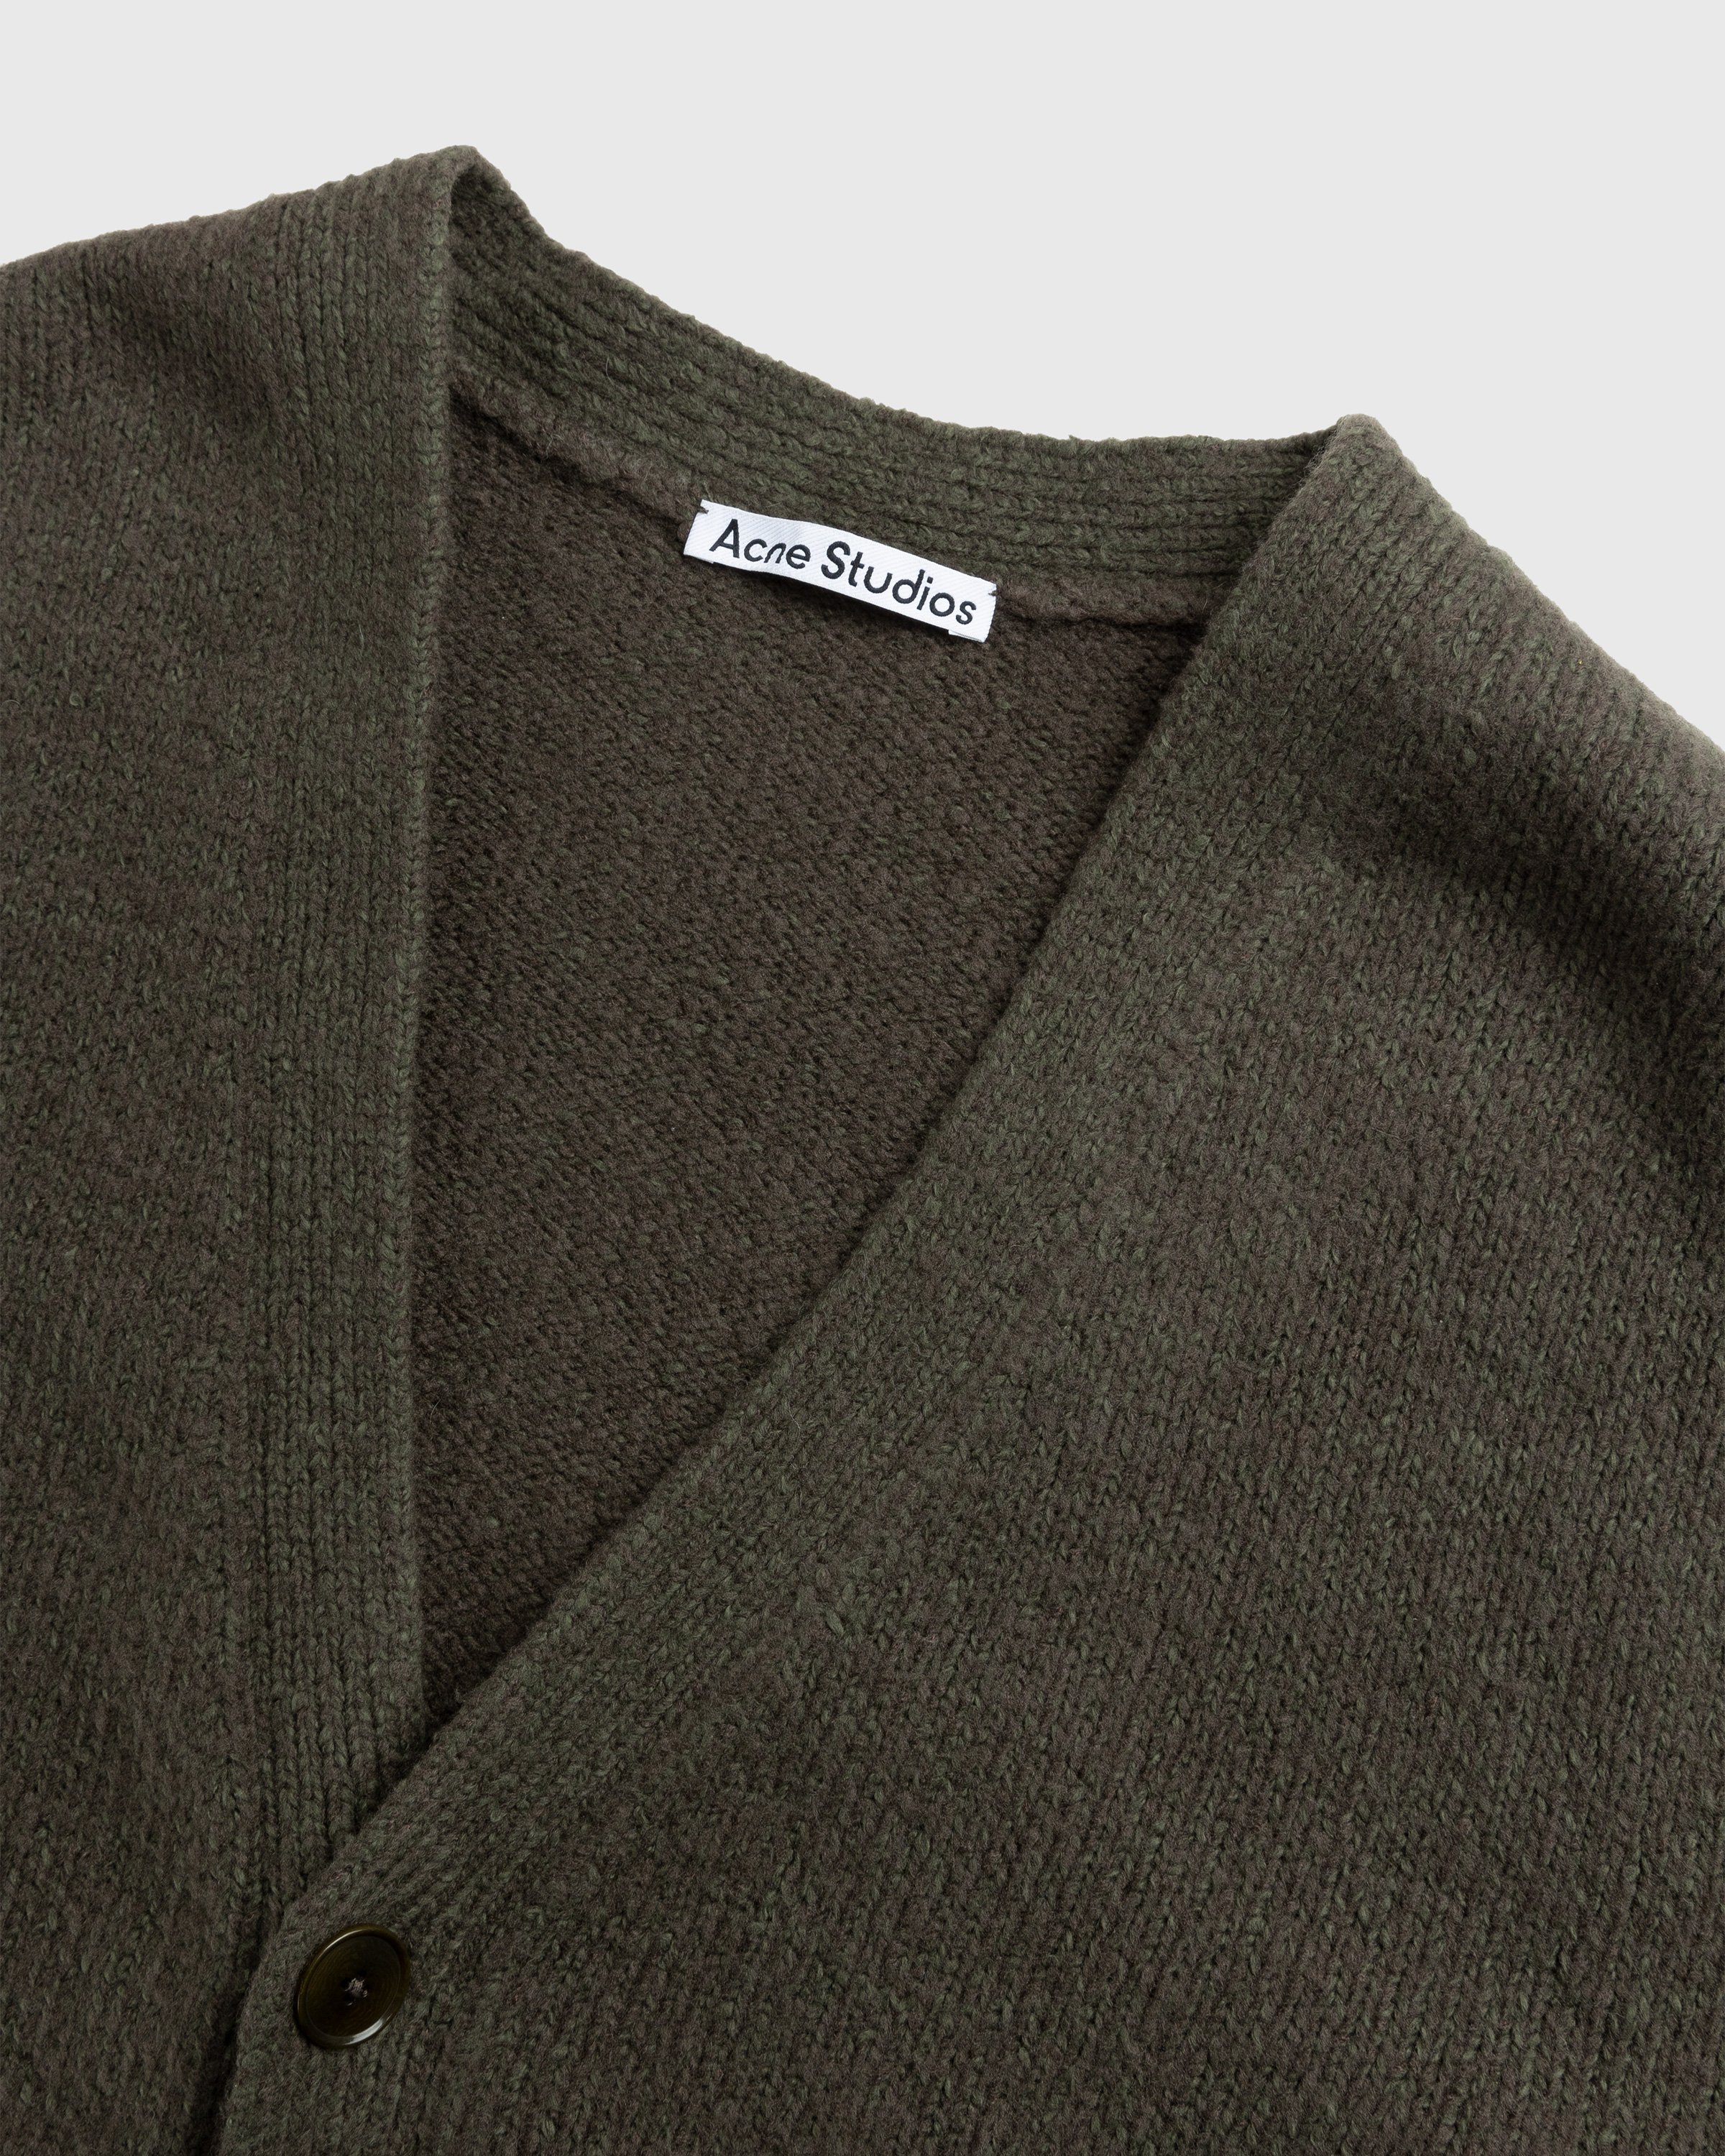 Acne Studios - Wool Blend V-Neck Cardigan Sweater Forest Green - Clothing - Grey - Image 3